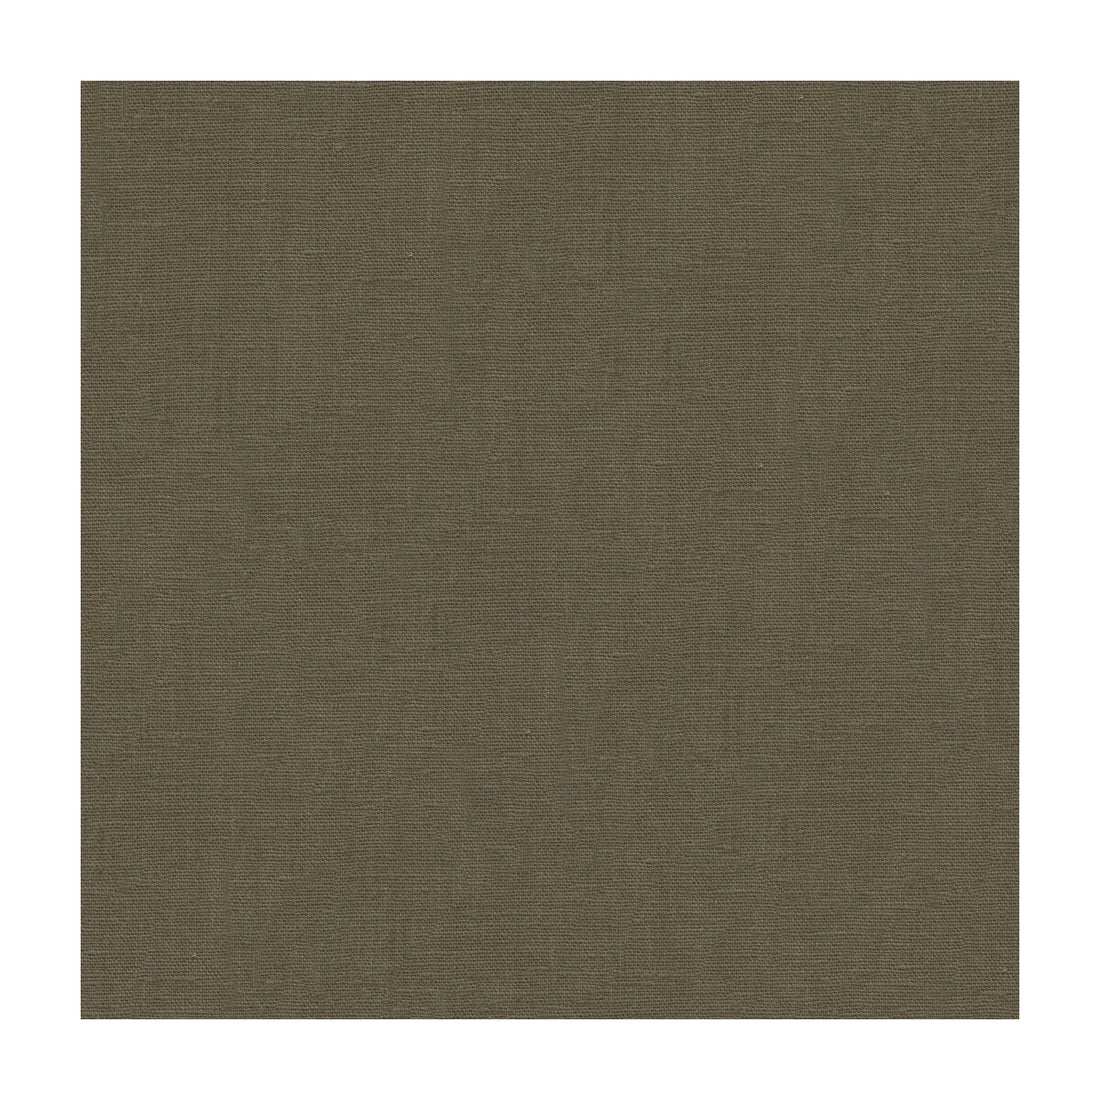 Dublin Linen fabric in carob color - pattern 2012175.606.0 - by Lee Jofa in the Colour Complements II collection